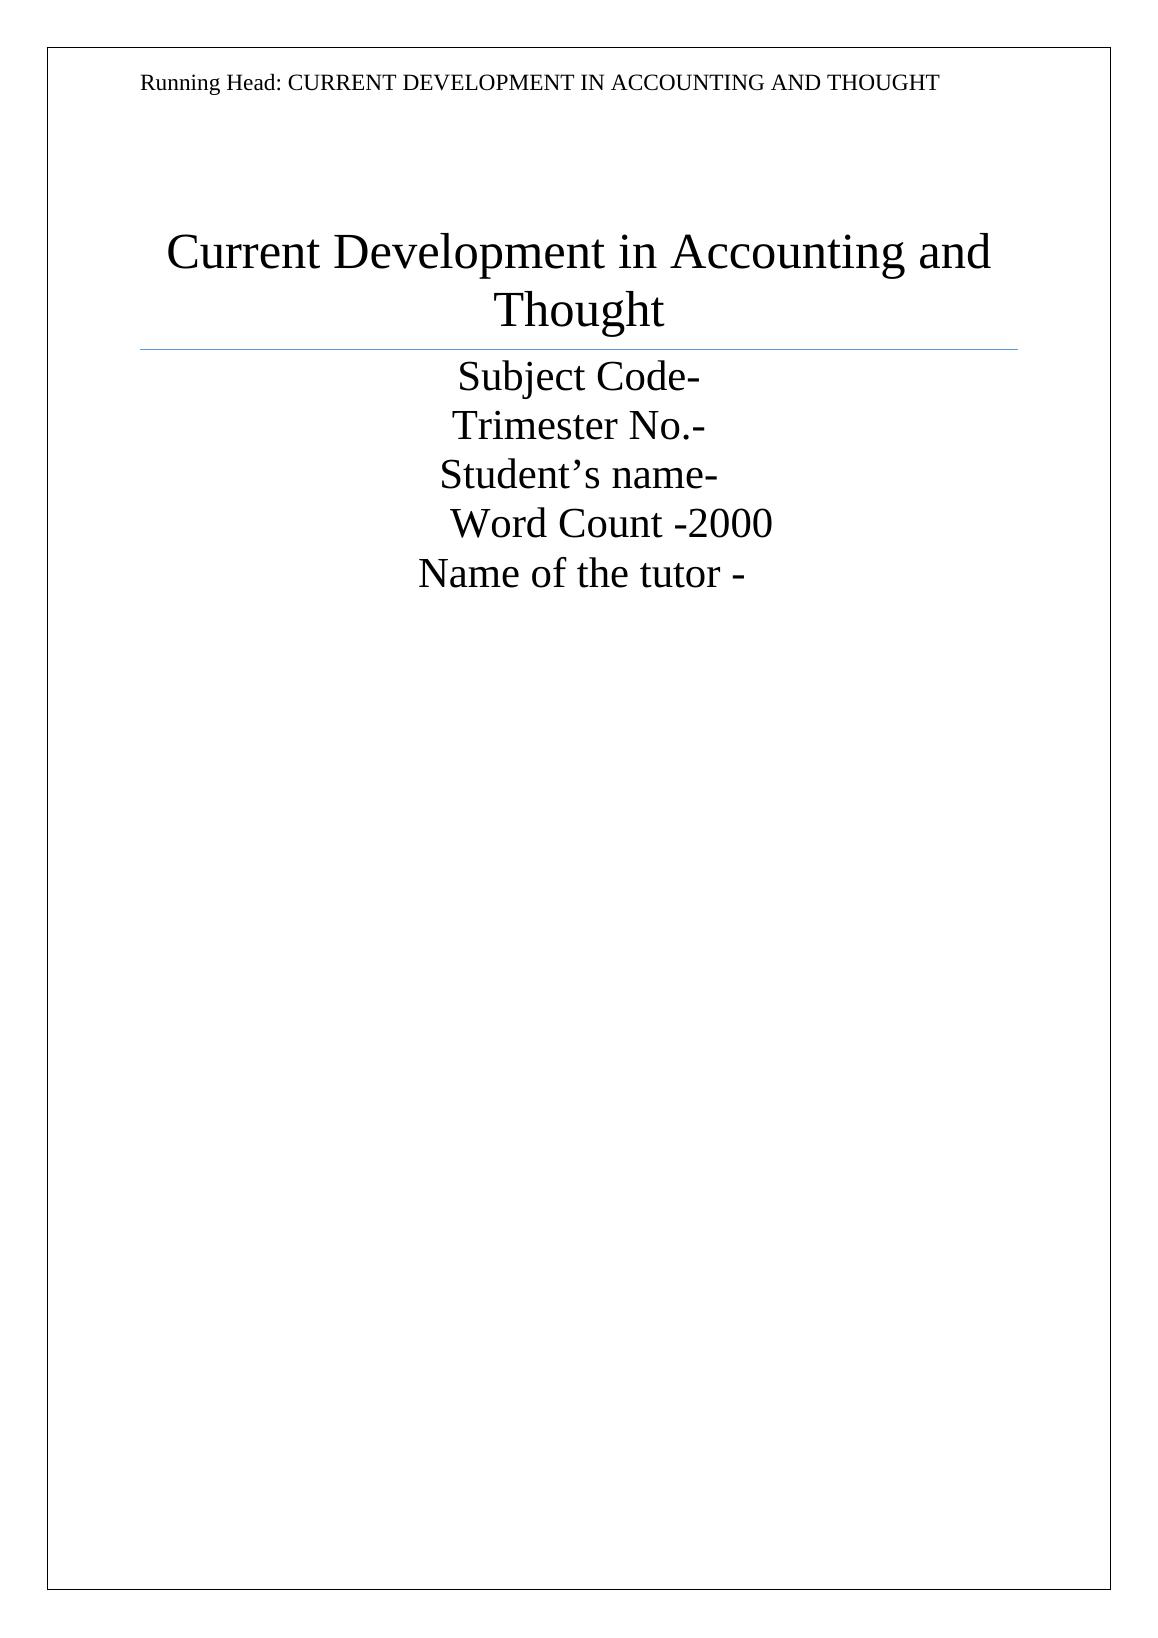 Current Development in Accounting - ACC518_1